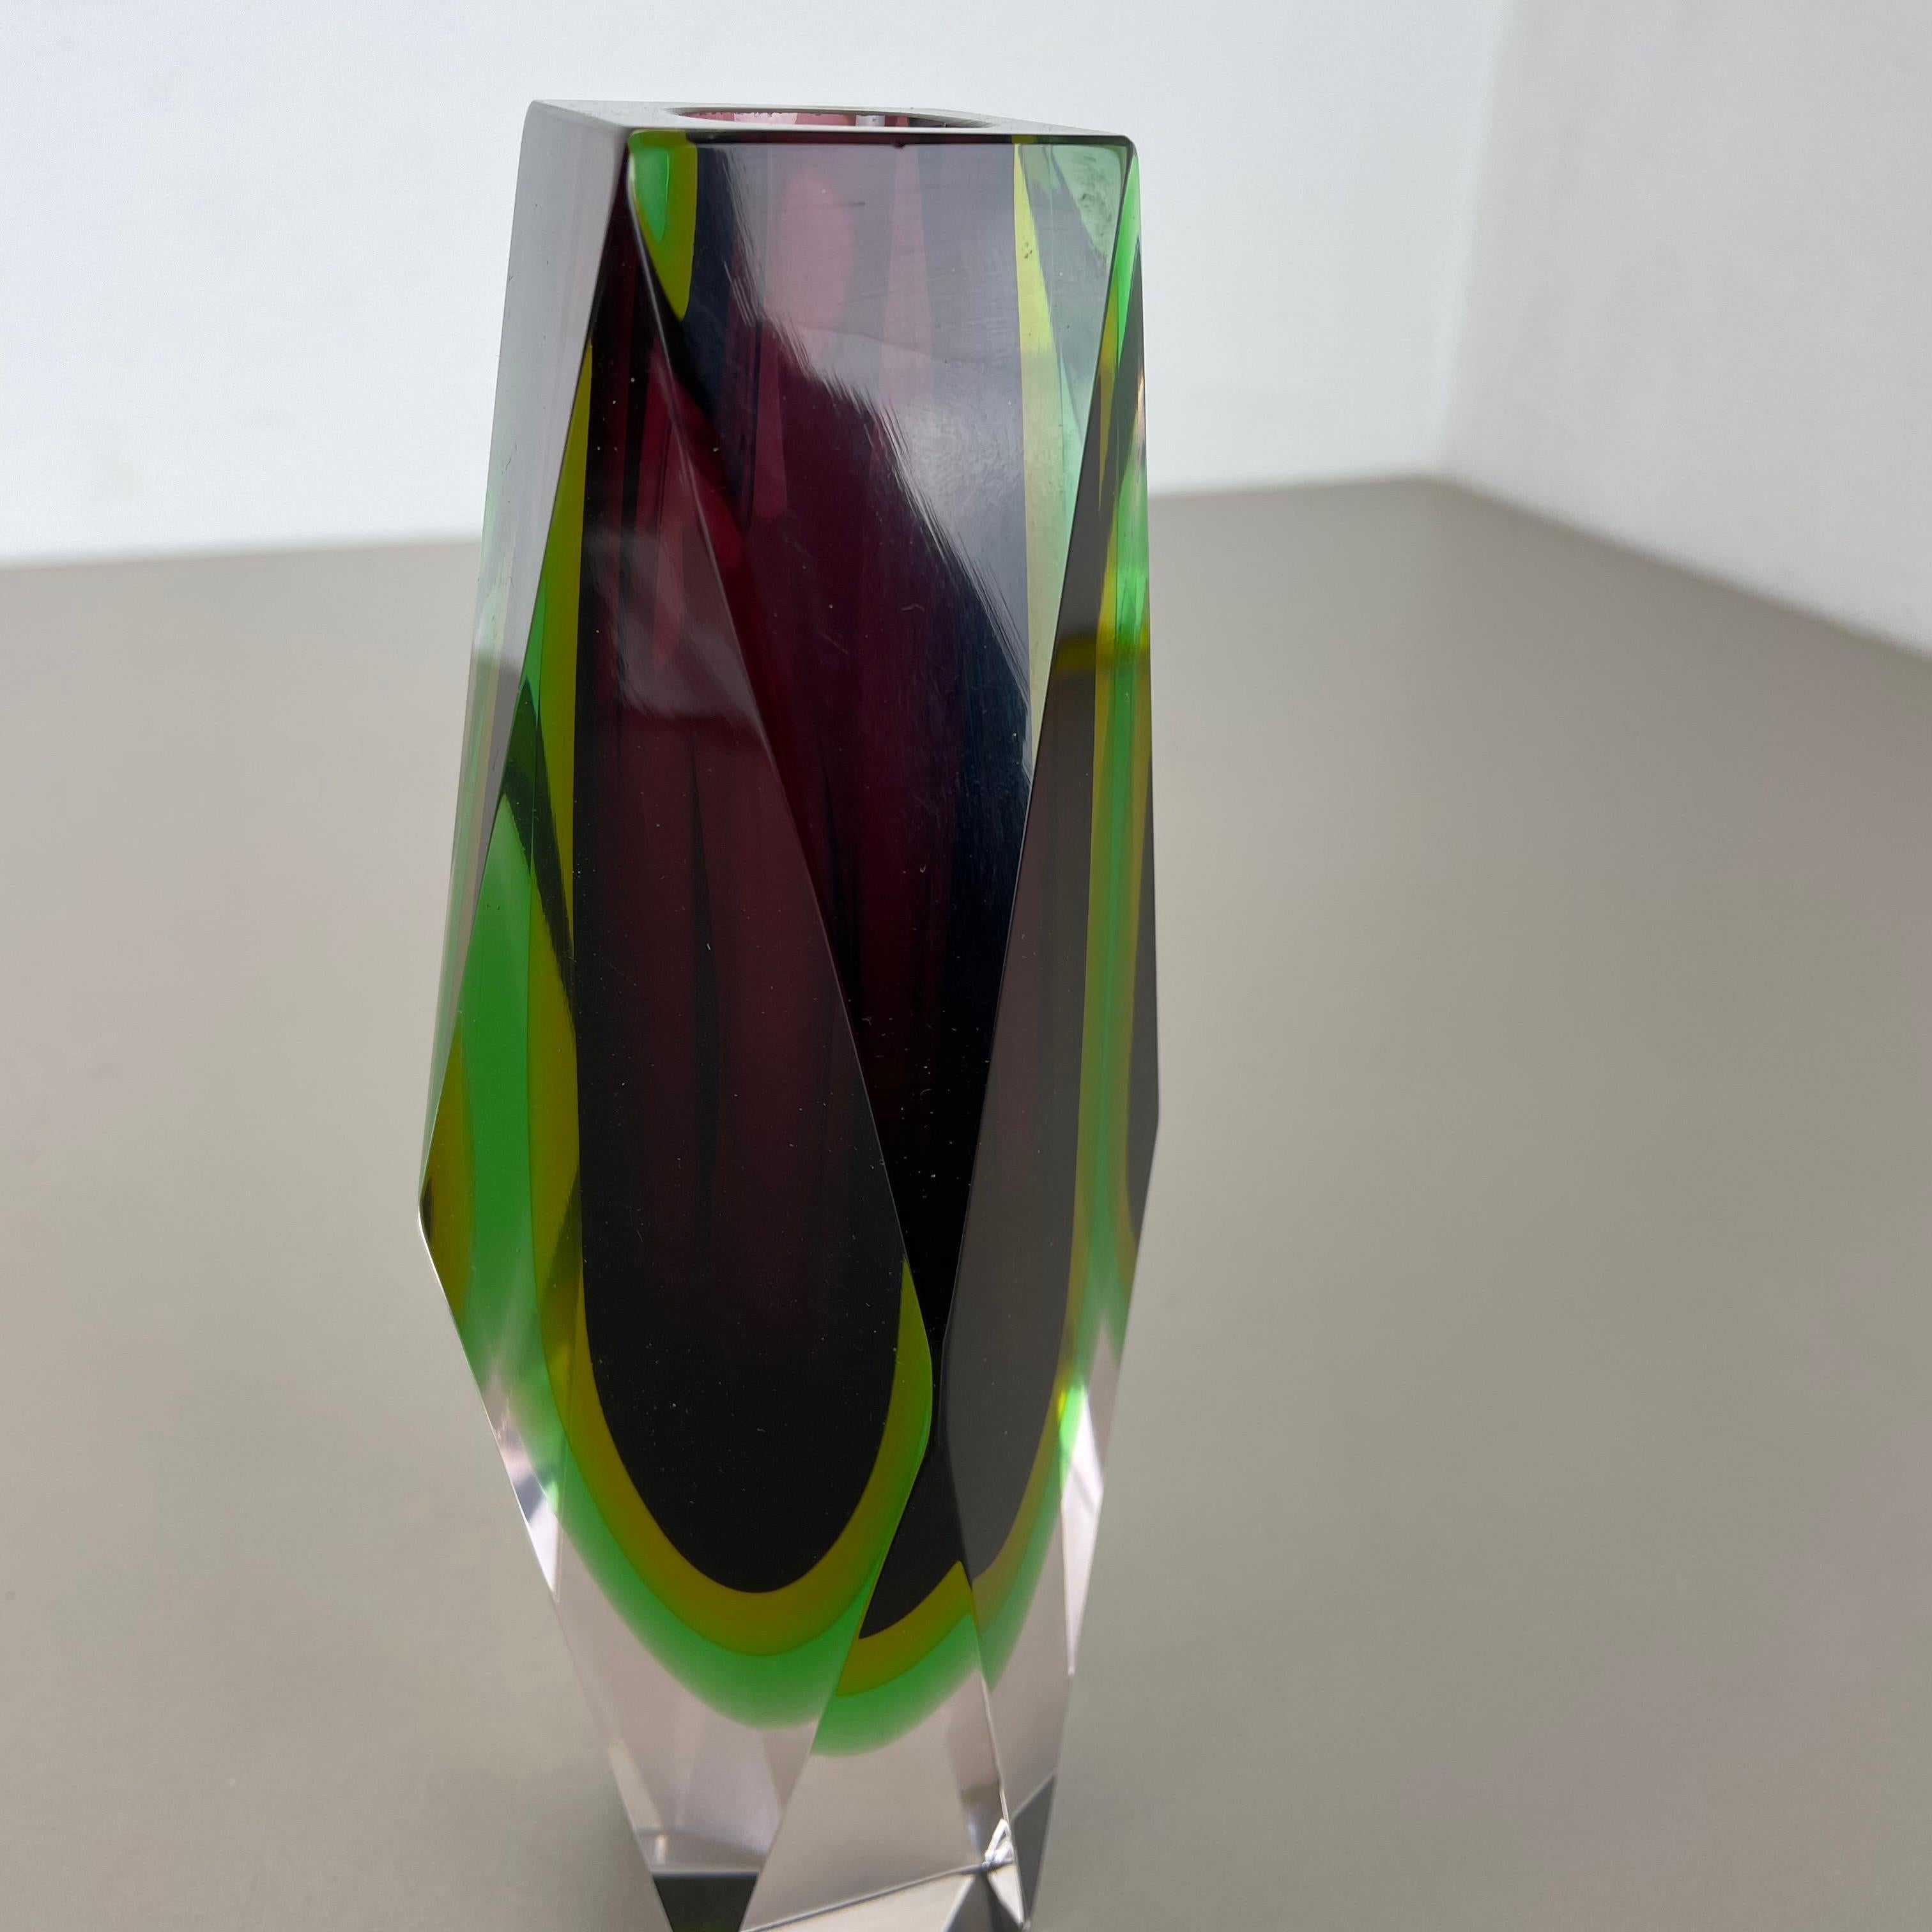 Heavy Large Murano Glass Sommerso 4 Colors Vase by Flavio Poli, Italy, 1970s For Sale 6